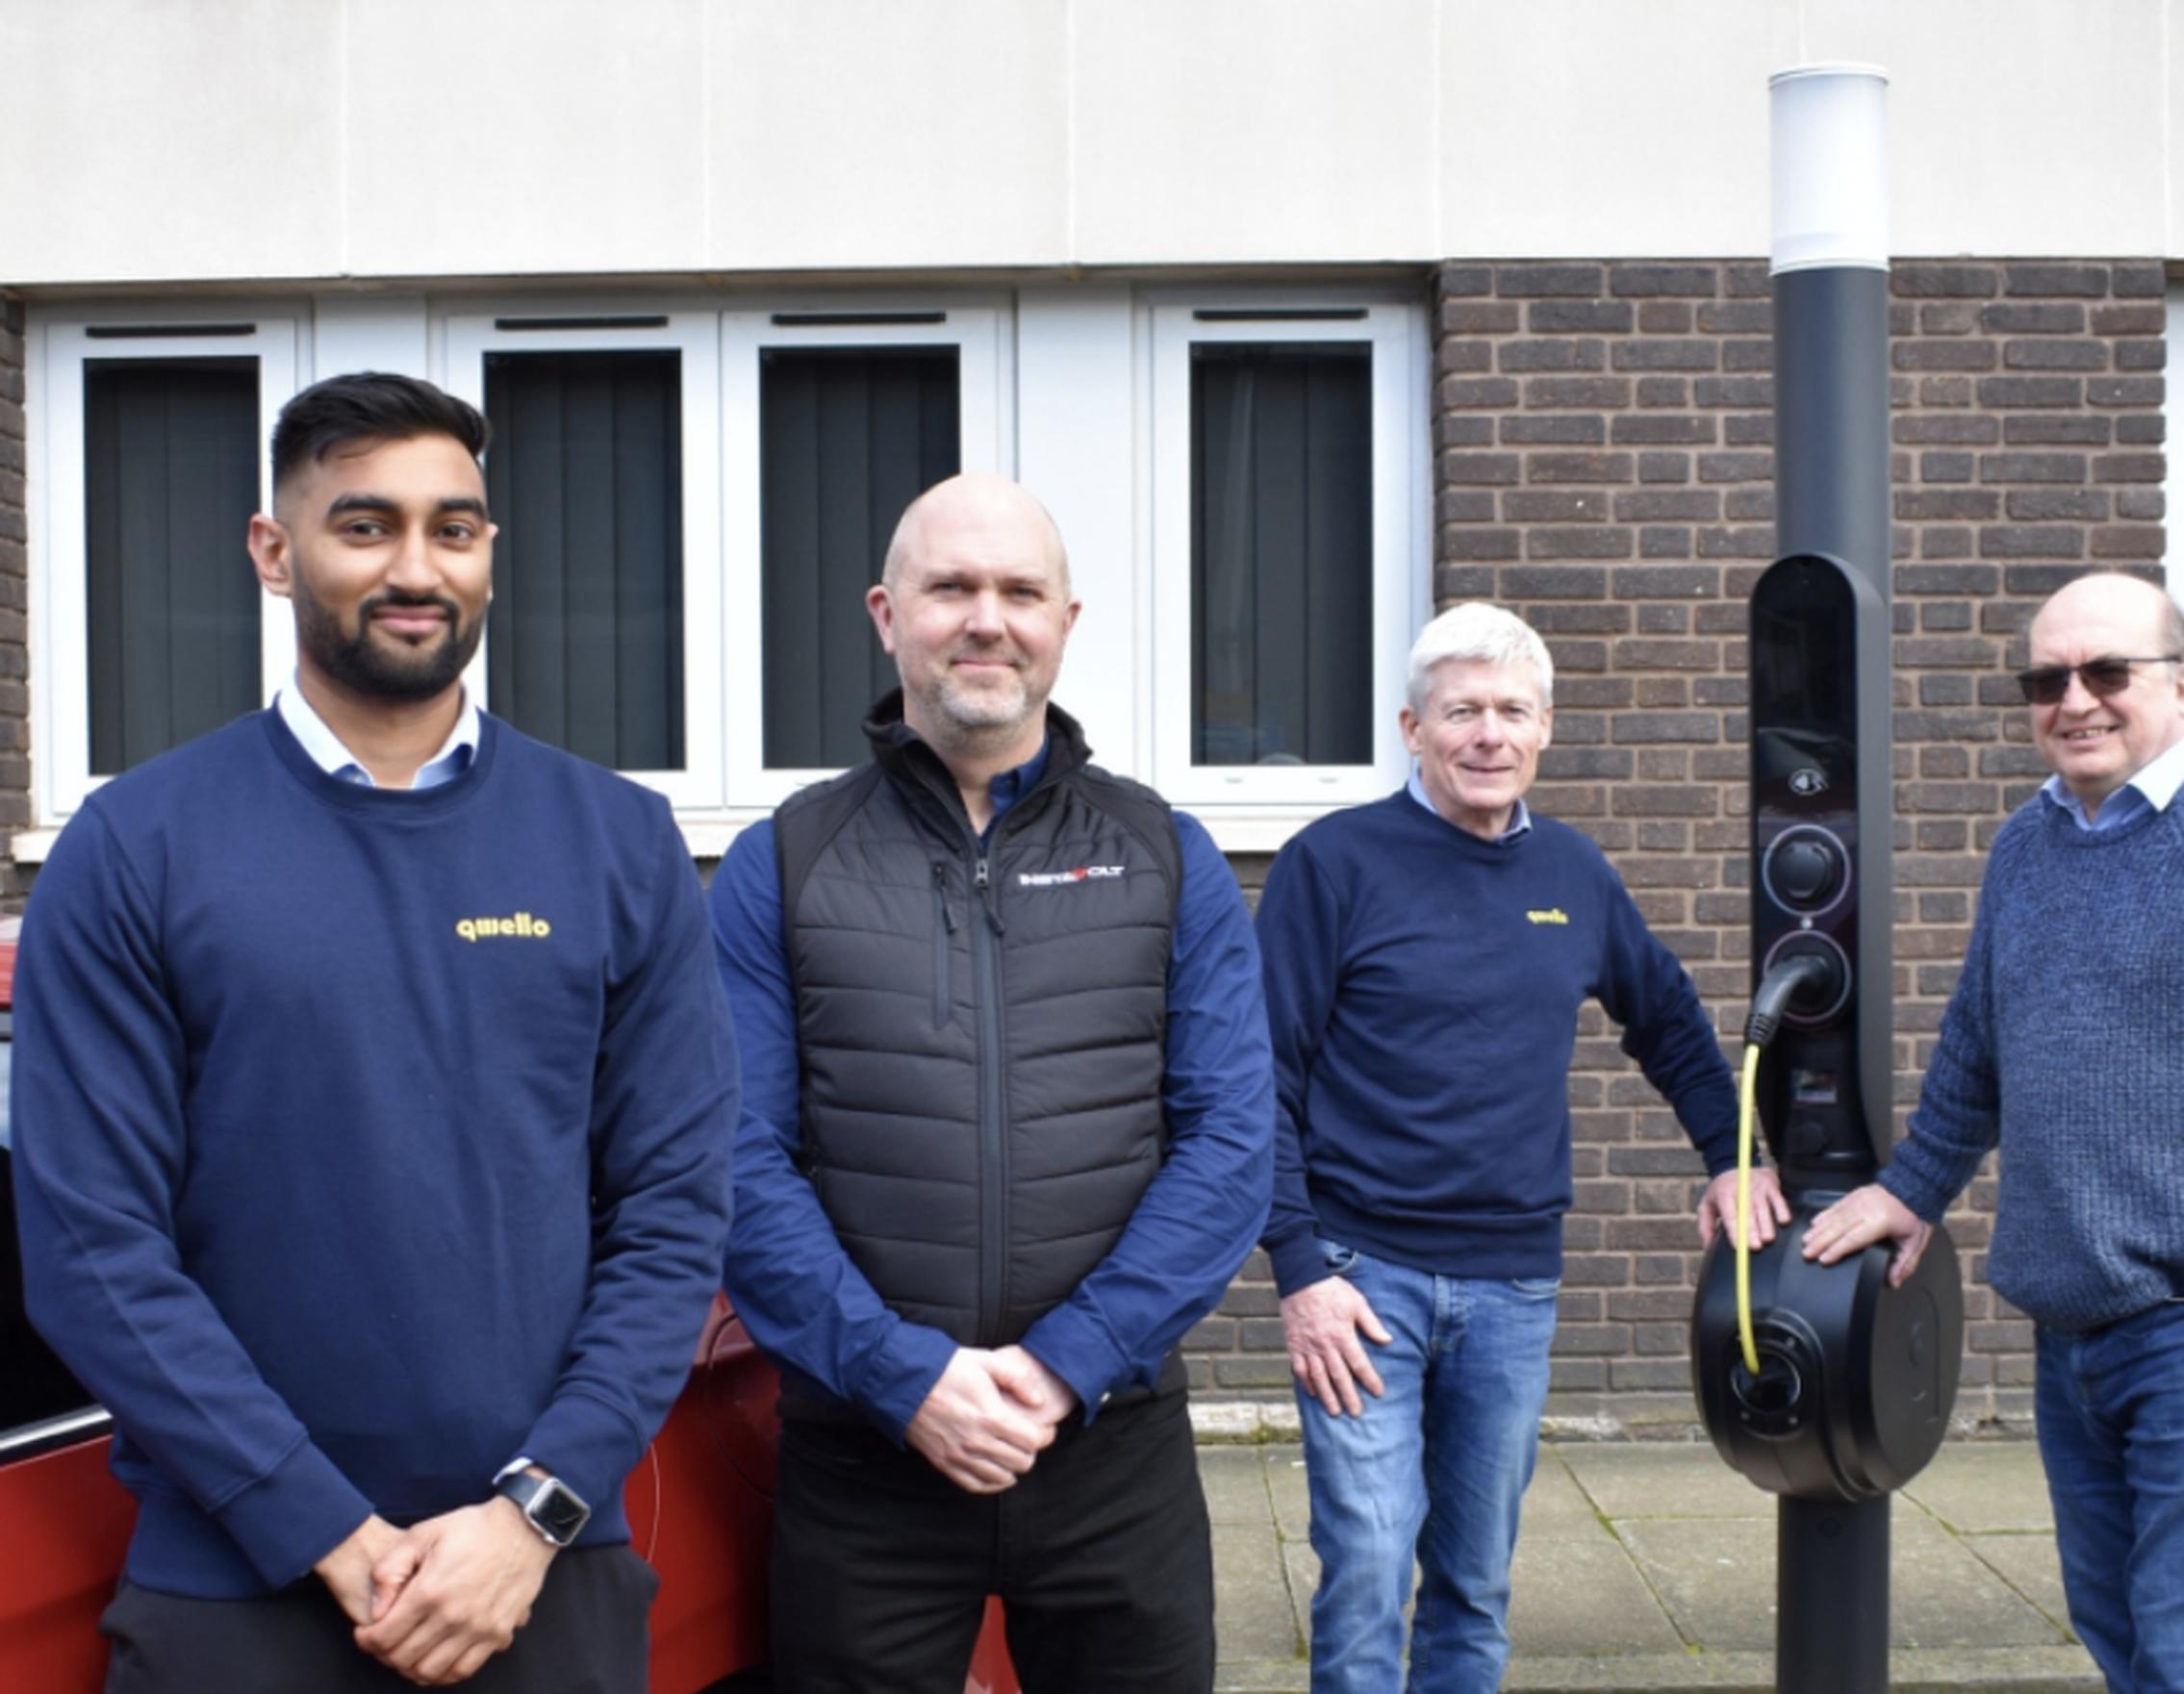 (l-r) Druvesh Desai, project manager at Qwello (UK), Simon Smith, chief operating officer at InstaVolt, Martin Hale, managing director at Qwello (UK), and Cllr Andy Mackiewicz, cabinet portfolio holder for climate change and planning